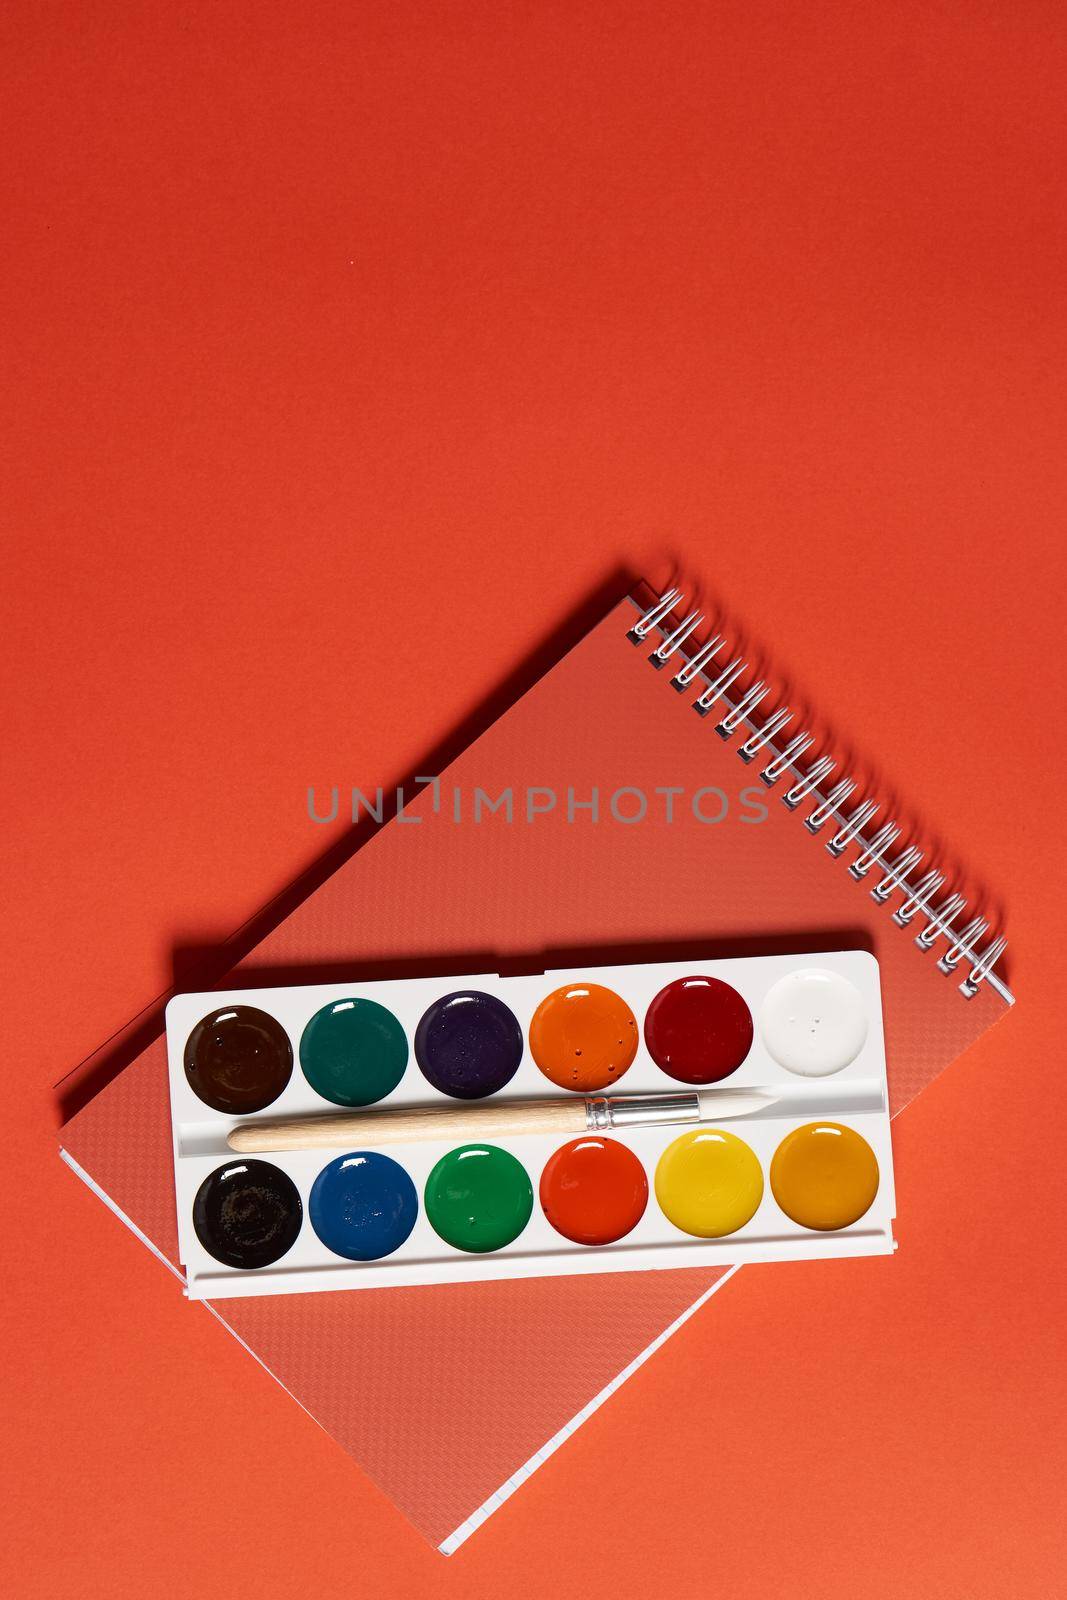 watercolor paint brush drawing art creative hobby. High quality photo